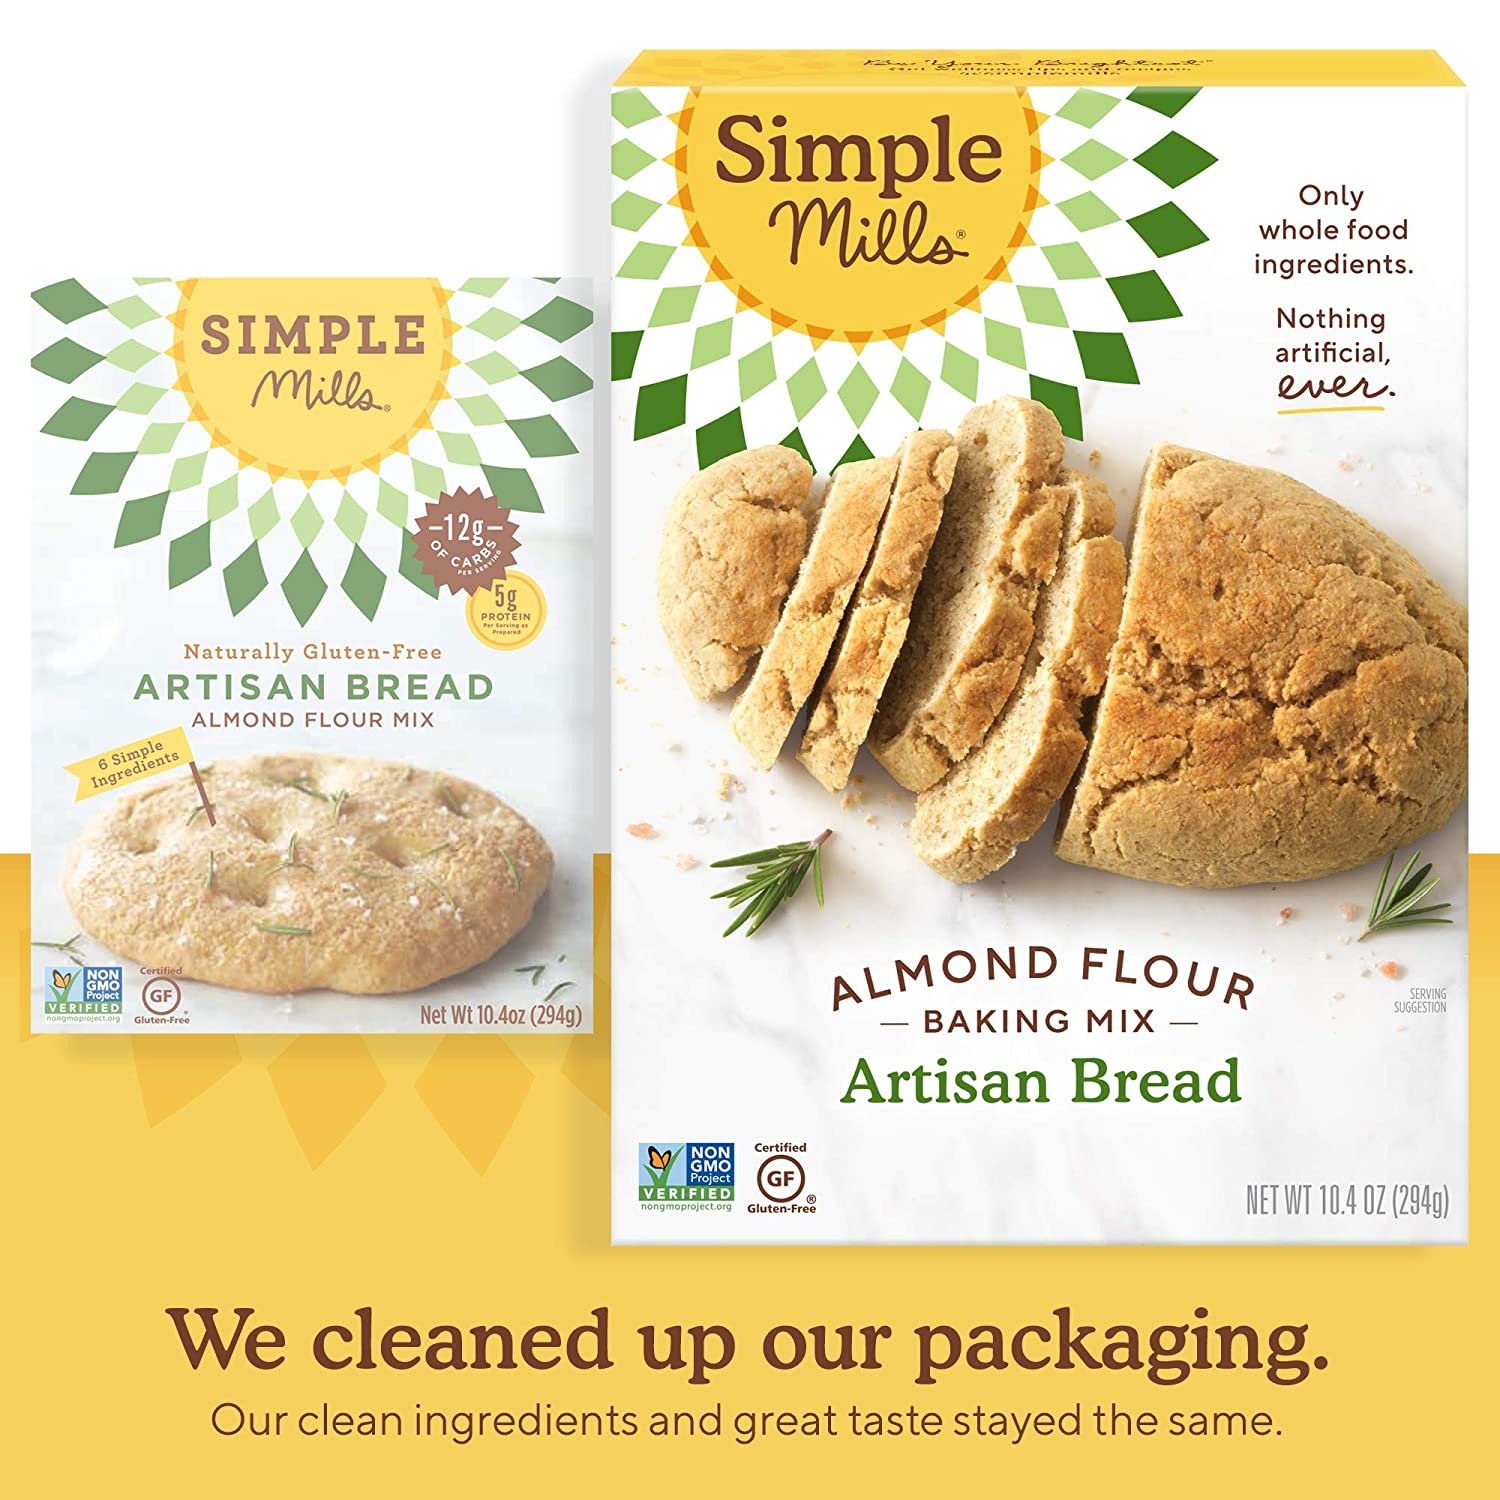 Simple Mills Almond Flour Baking Mix, Gluten Free Artisan Bread Mix, Made with whole foods (Copy) (Copy) (Copy) (Copy)